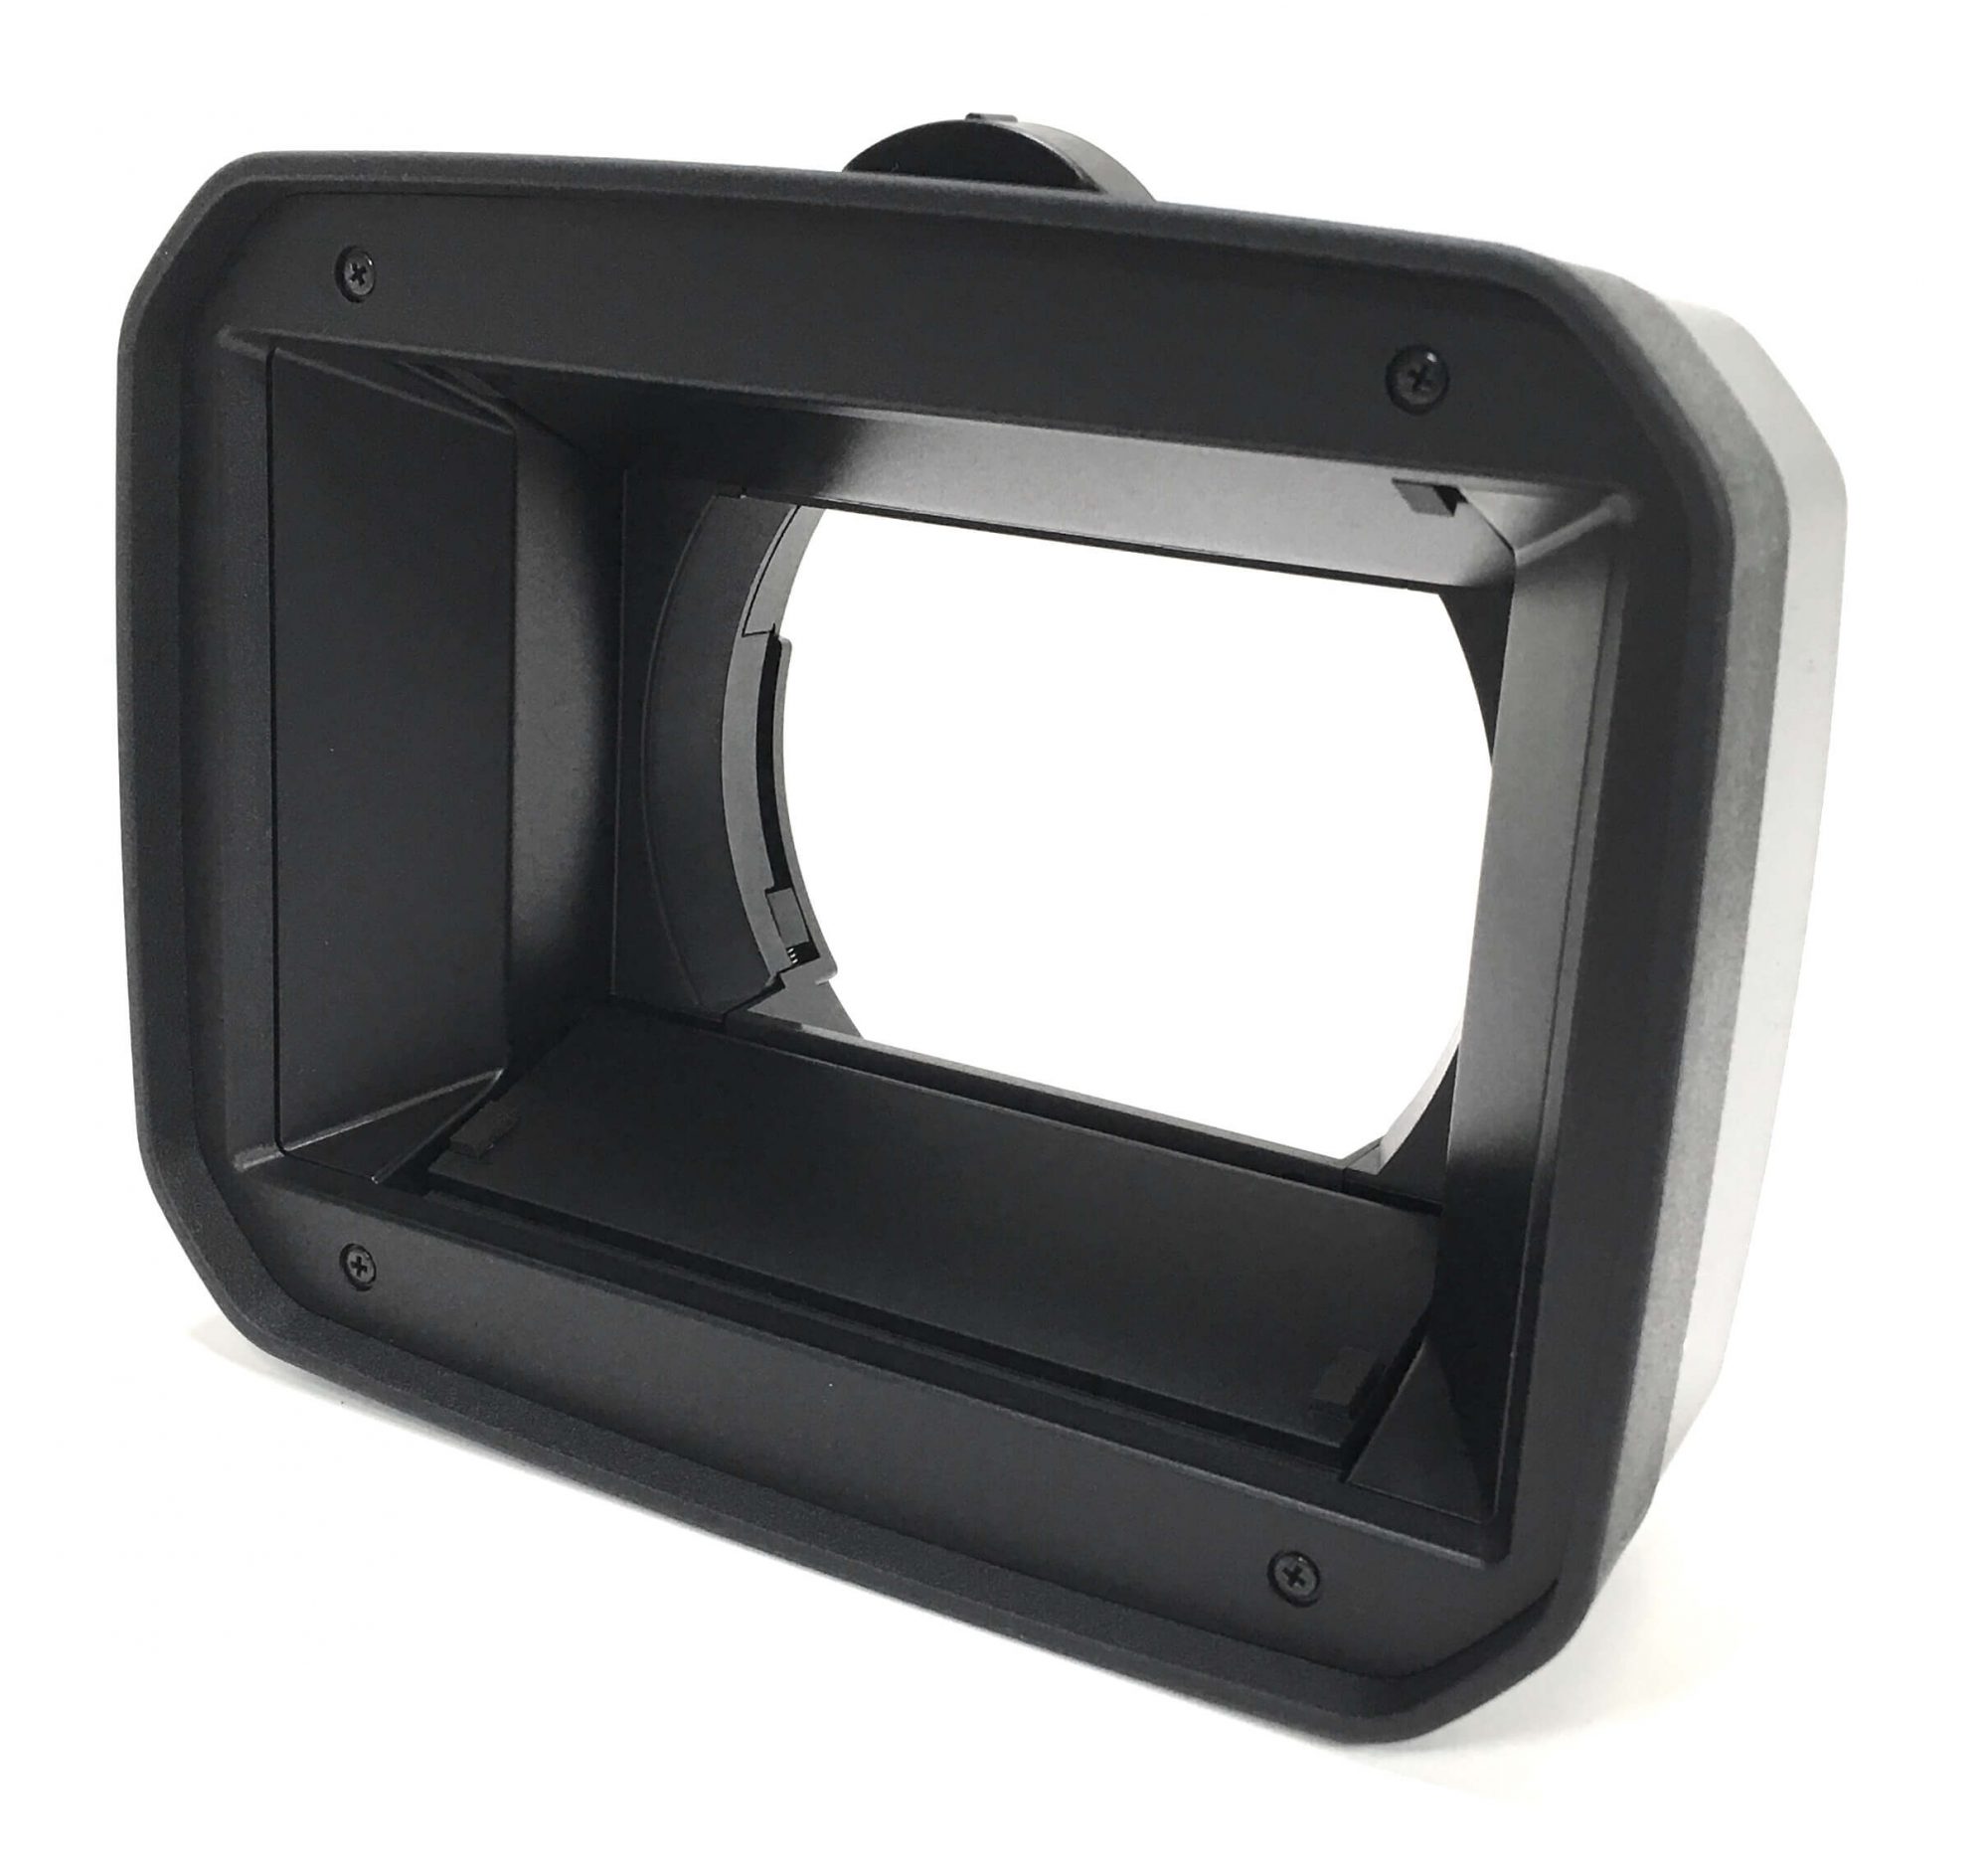 Original Lens Hood with Shutter for the Sony PXW-Z150 camcorder. It is a genuine Sony part, sourced directly from Sony USA. Brand new factory fresh. Free Shipping.